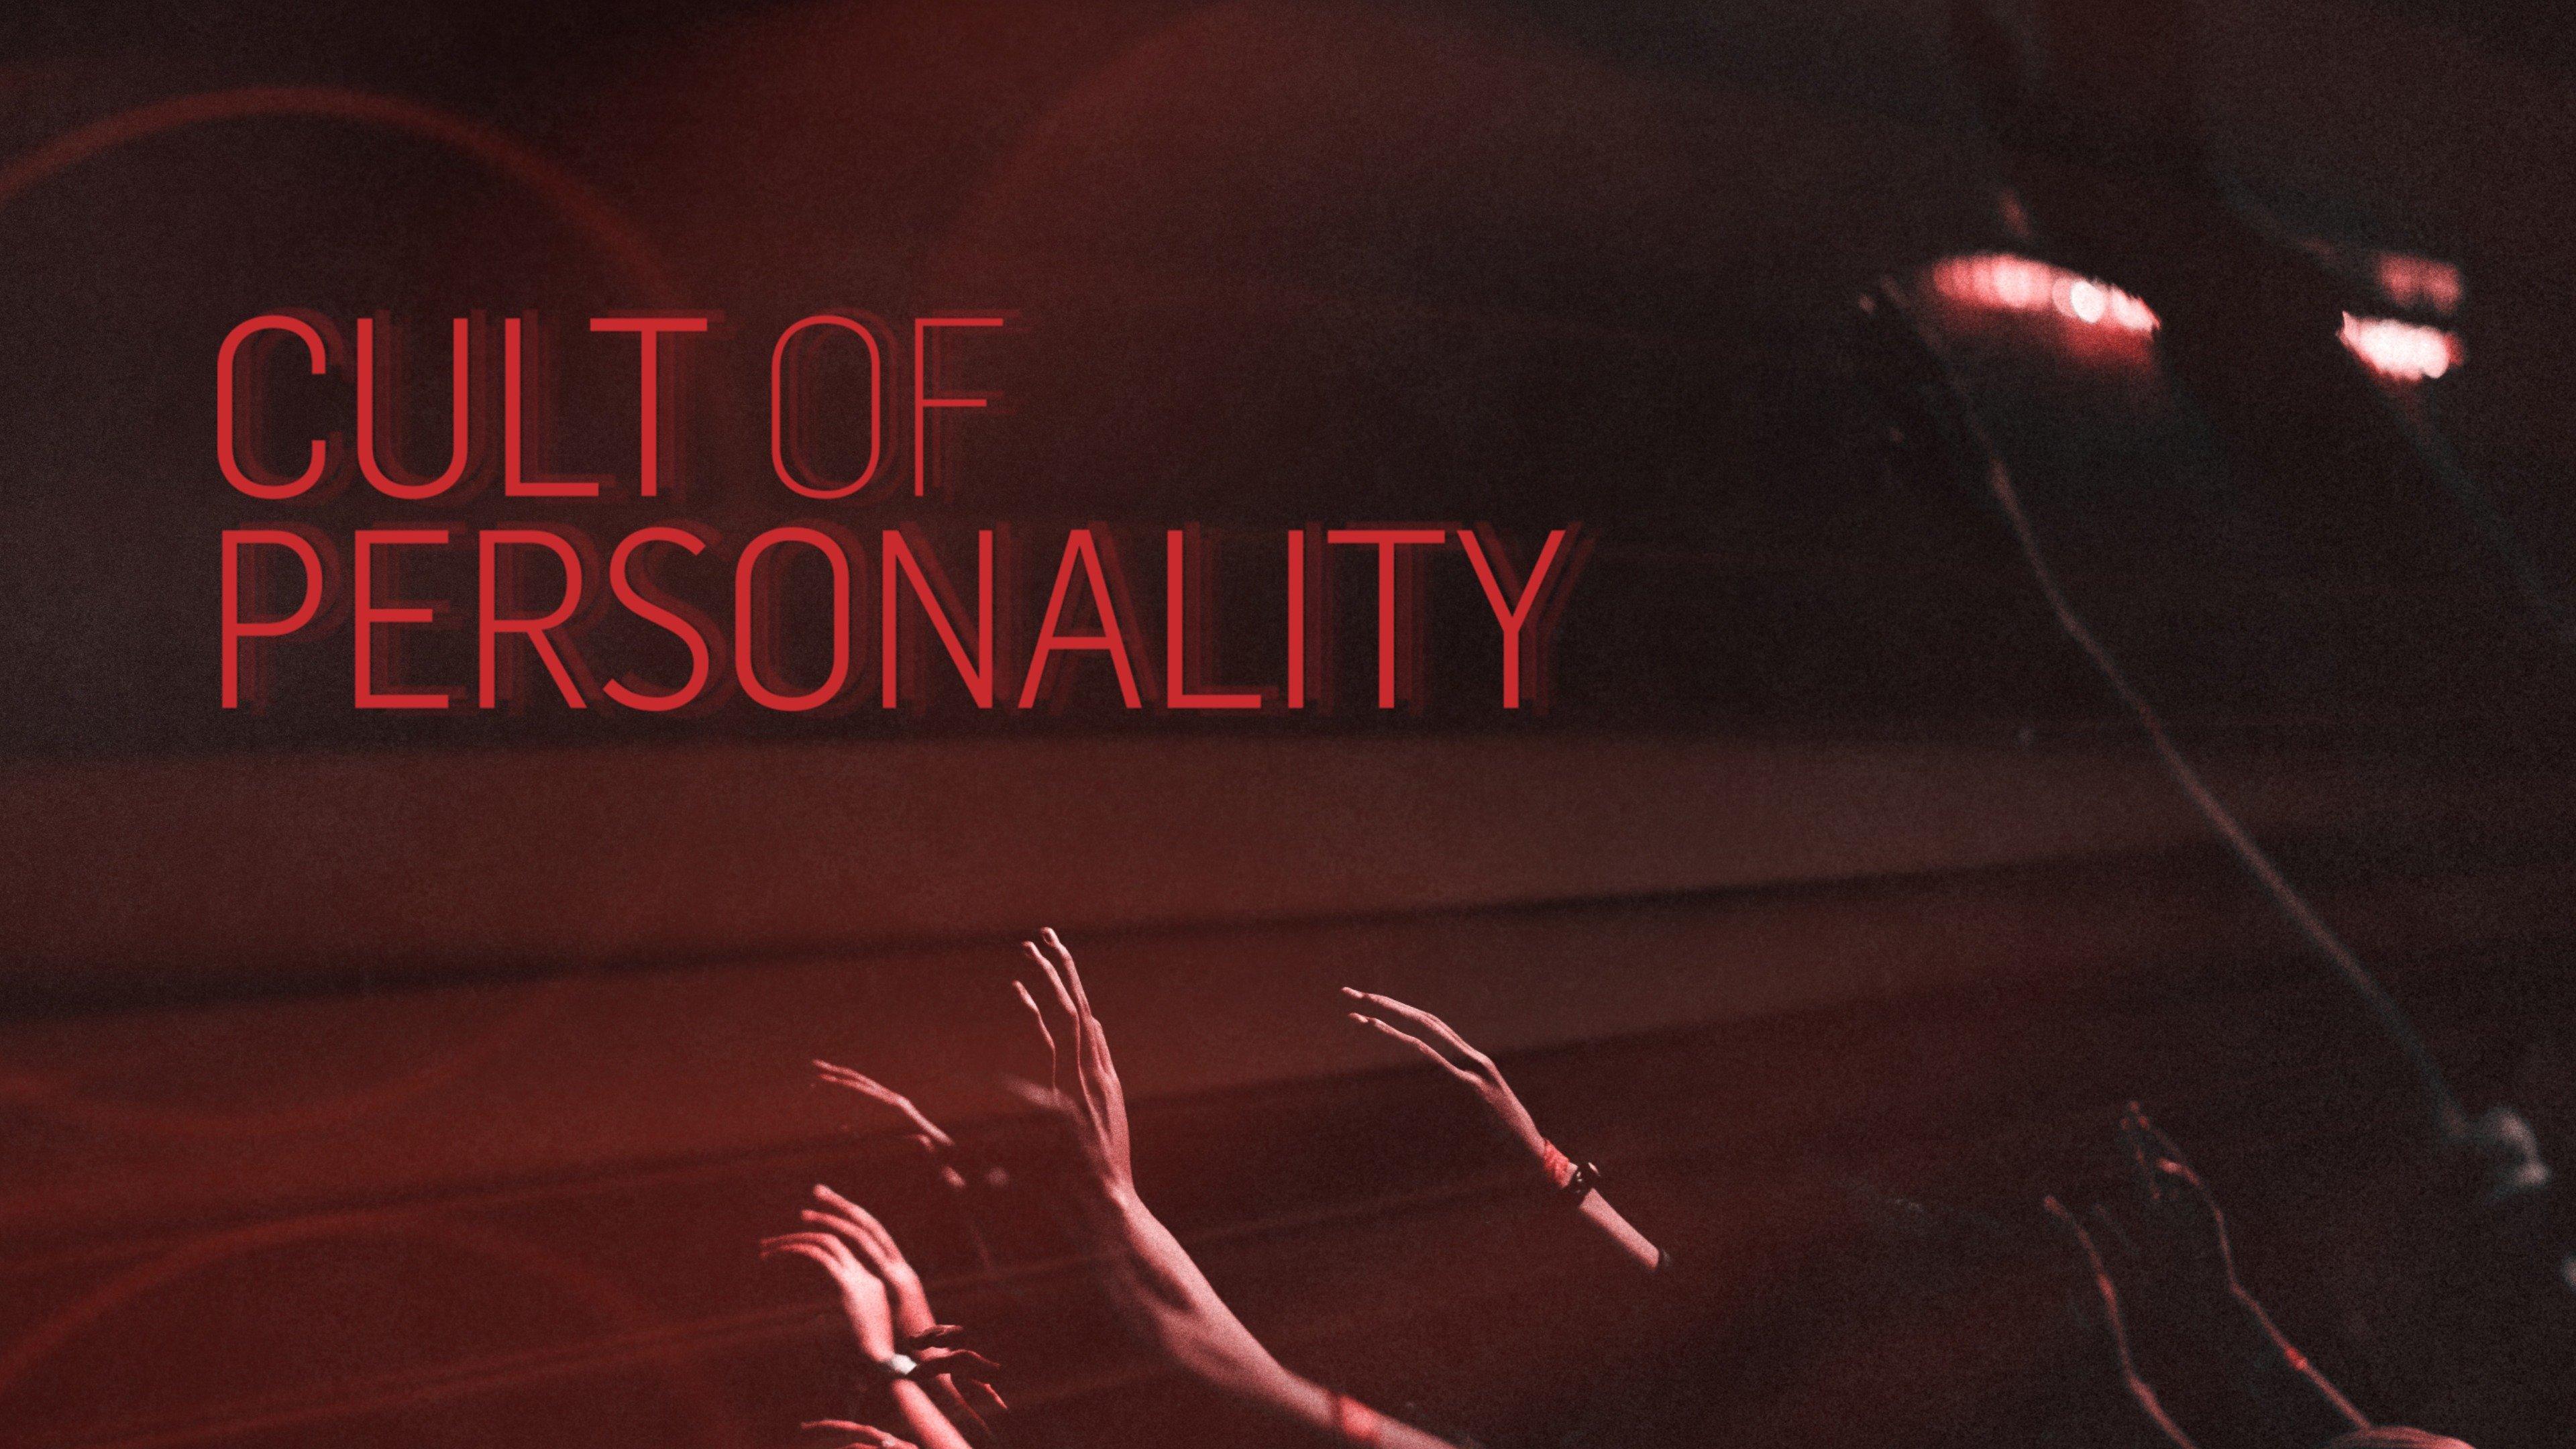 Watch Cult of Personality Streaming Online on Philo (Free Trial)